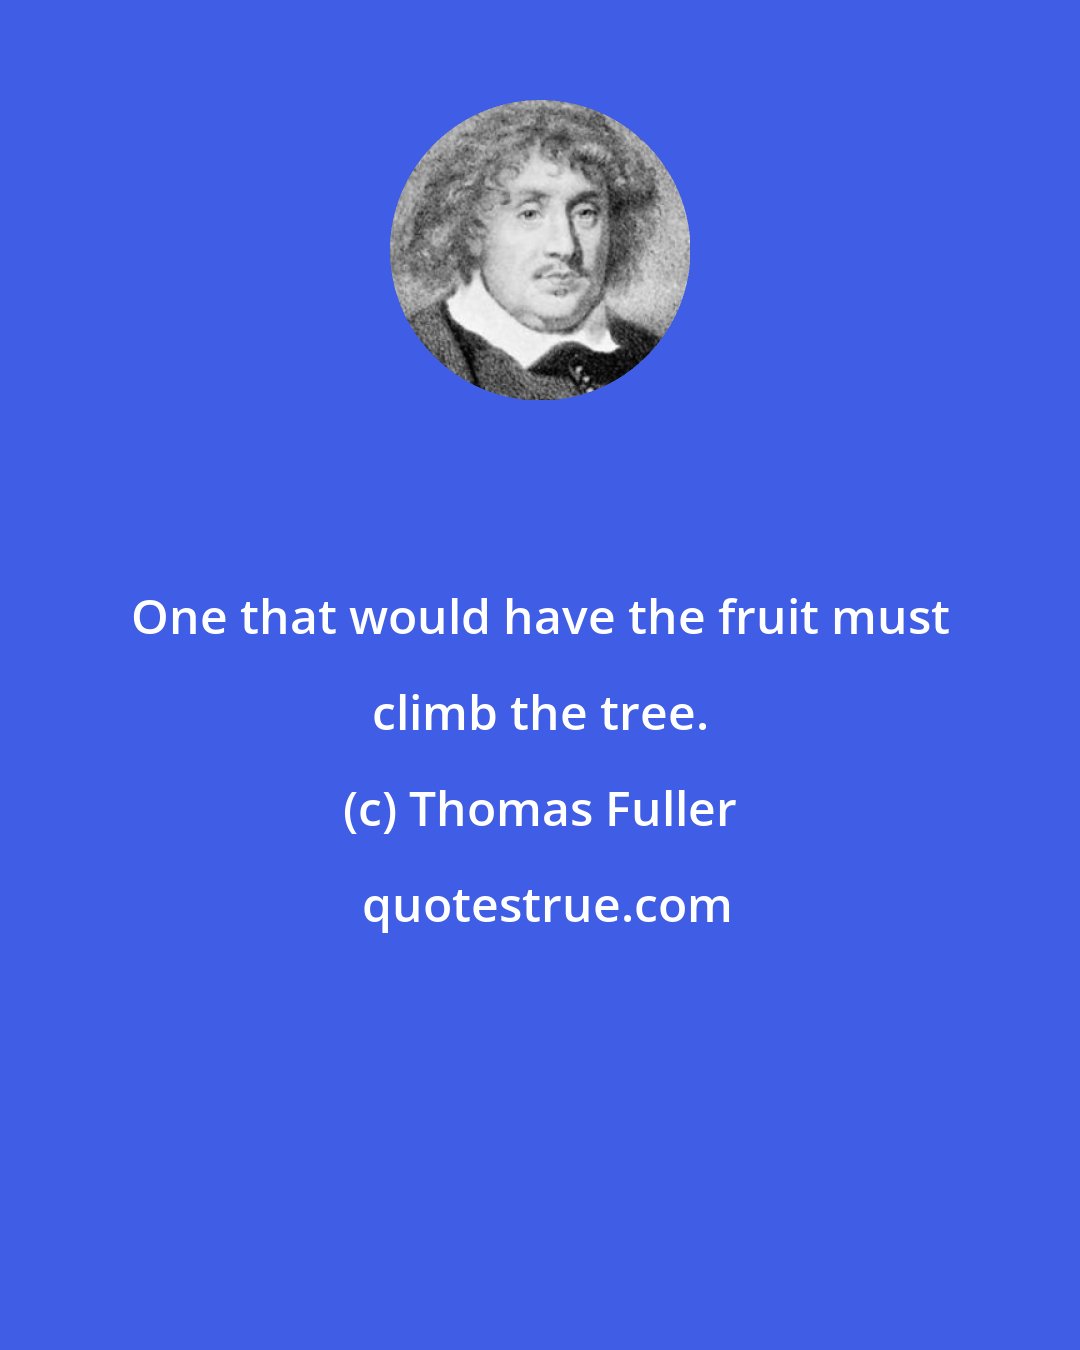 Thomas Fuller: One that would have the fruit must climb the tree.